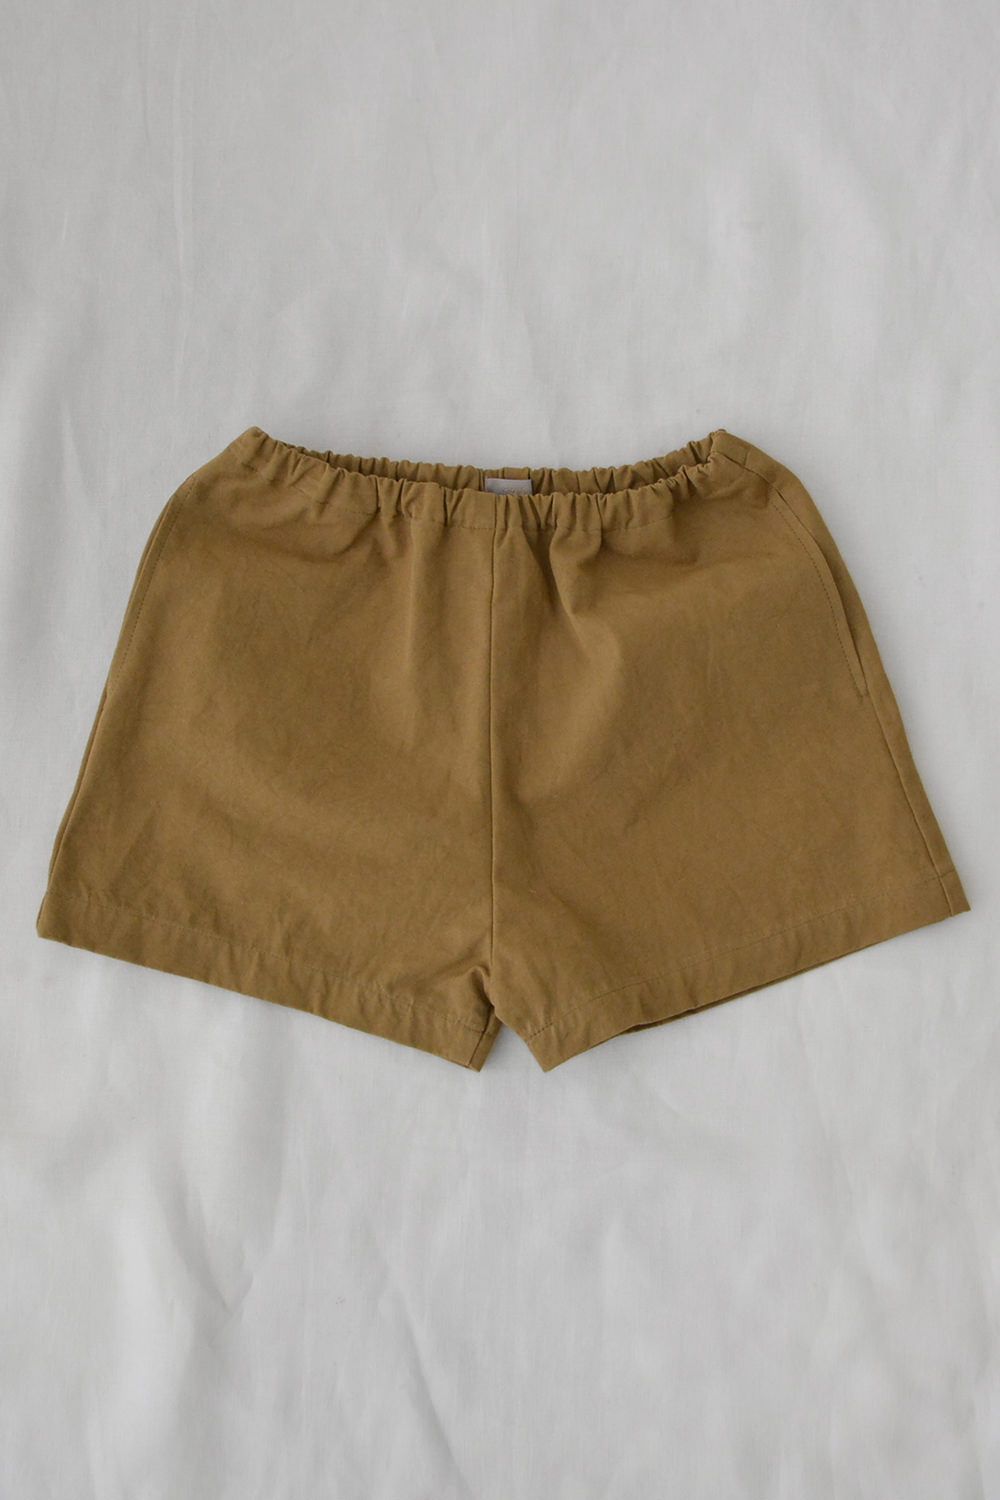 Kid's Summer Shorts - Khaki Top Picture